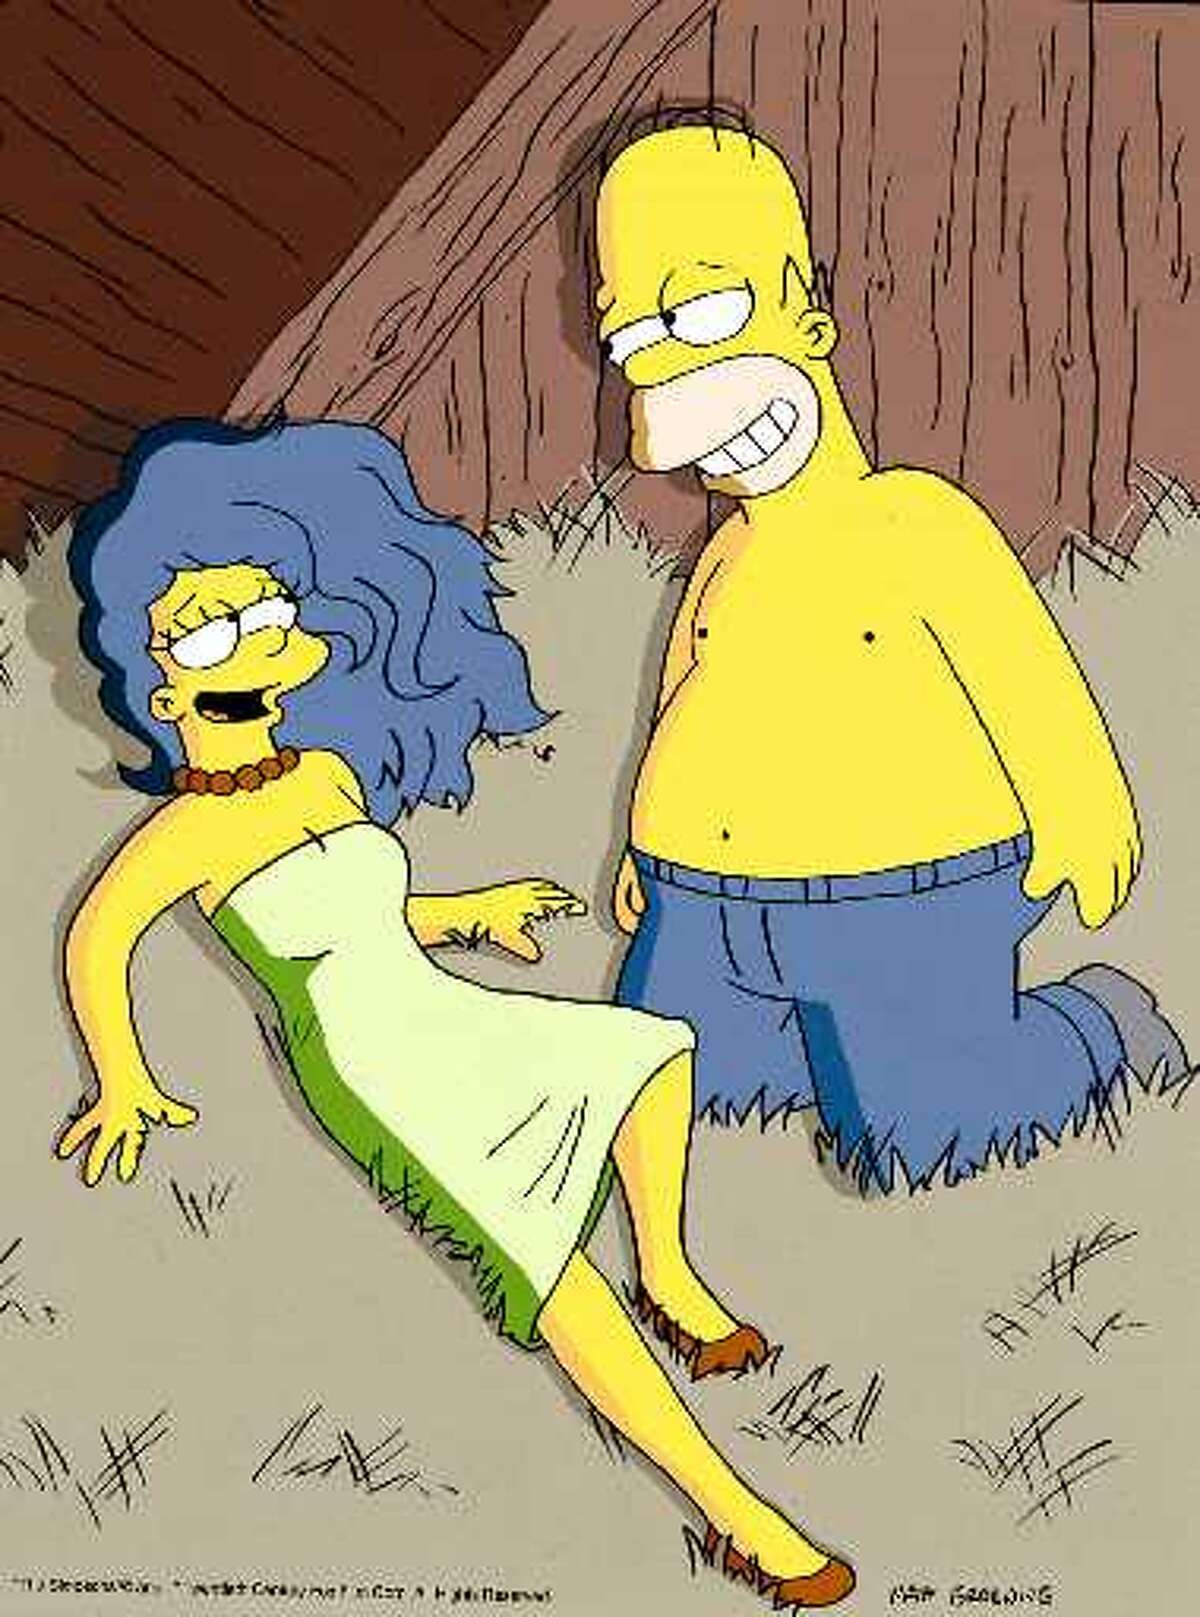 THE SIMPSONS: THE OUTLAWS - Marge lets her hair down (a la Jane Russell)